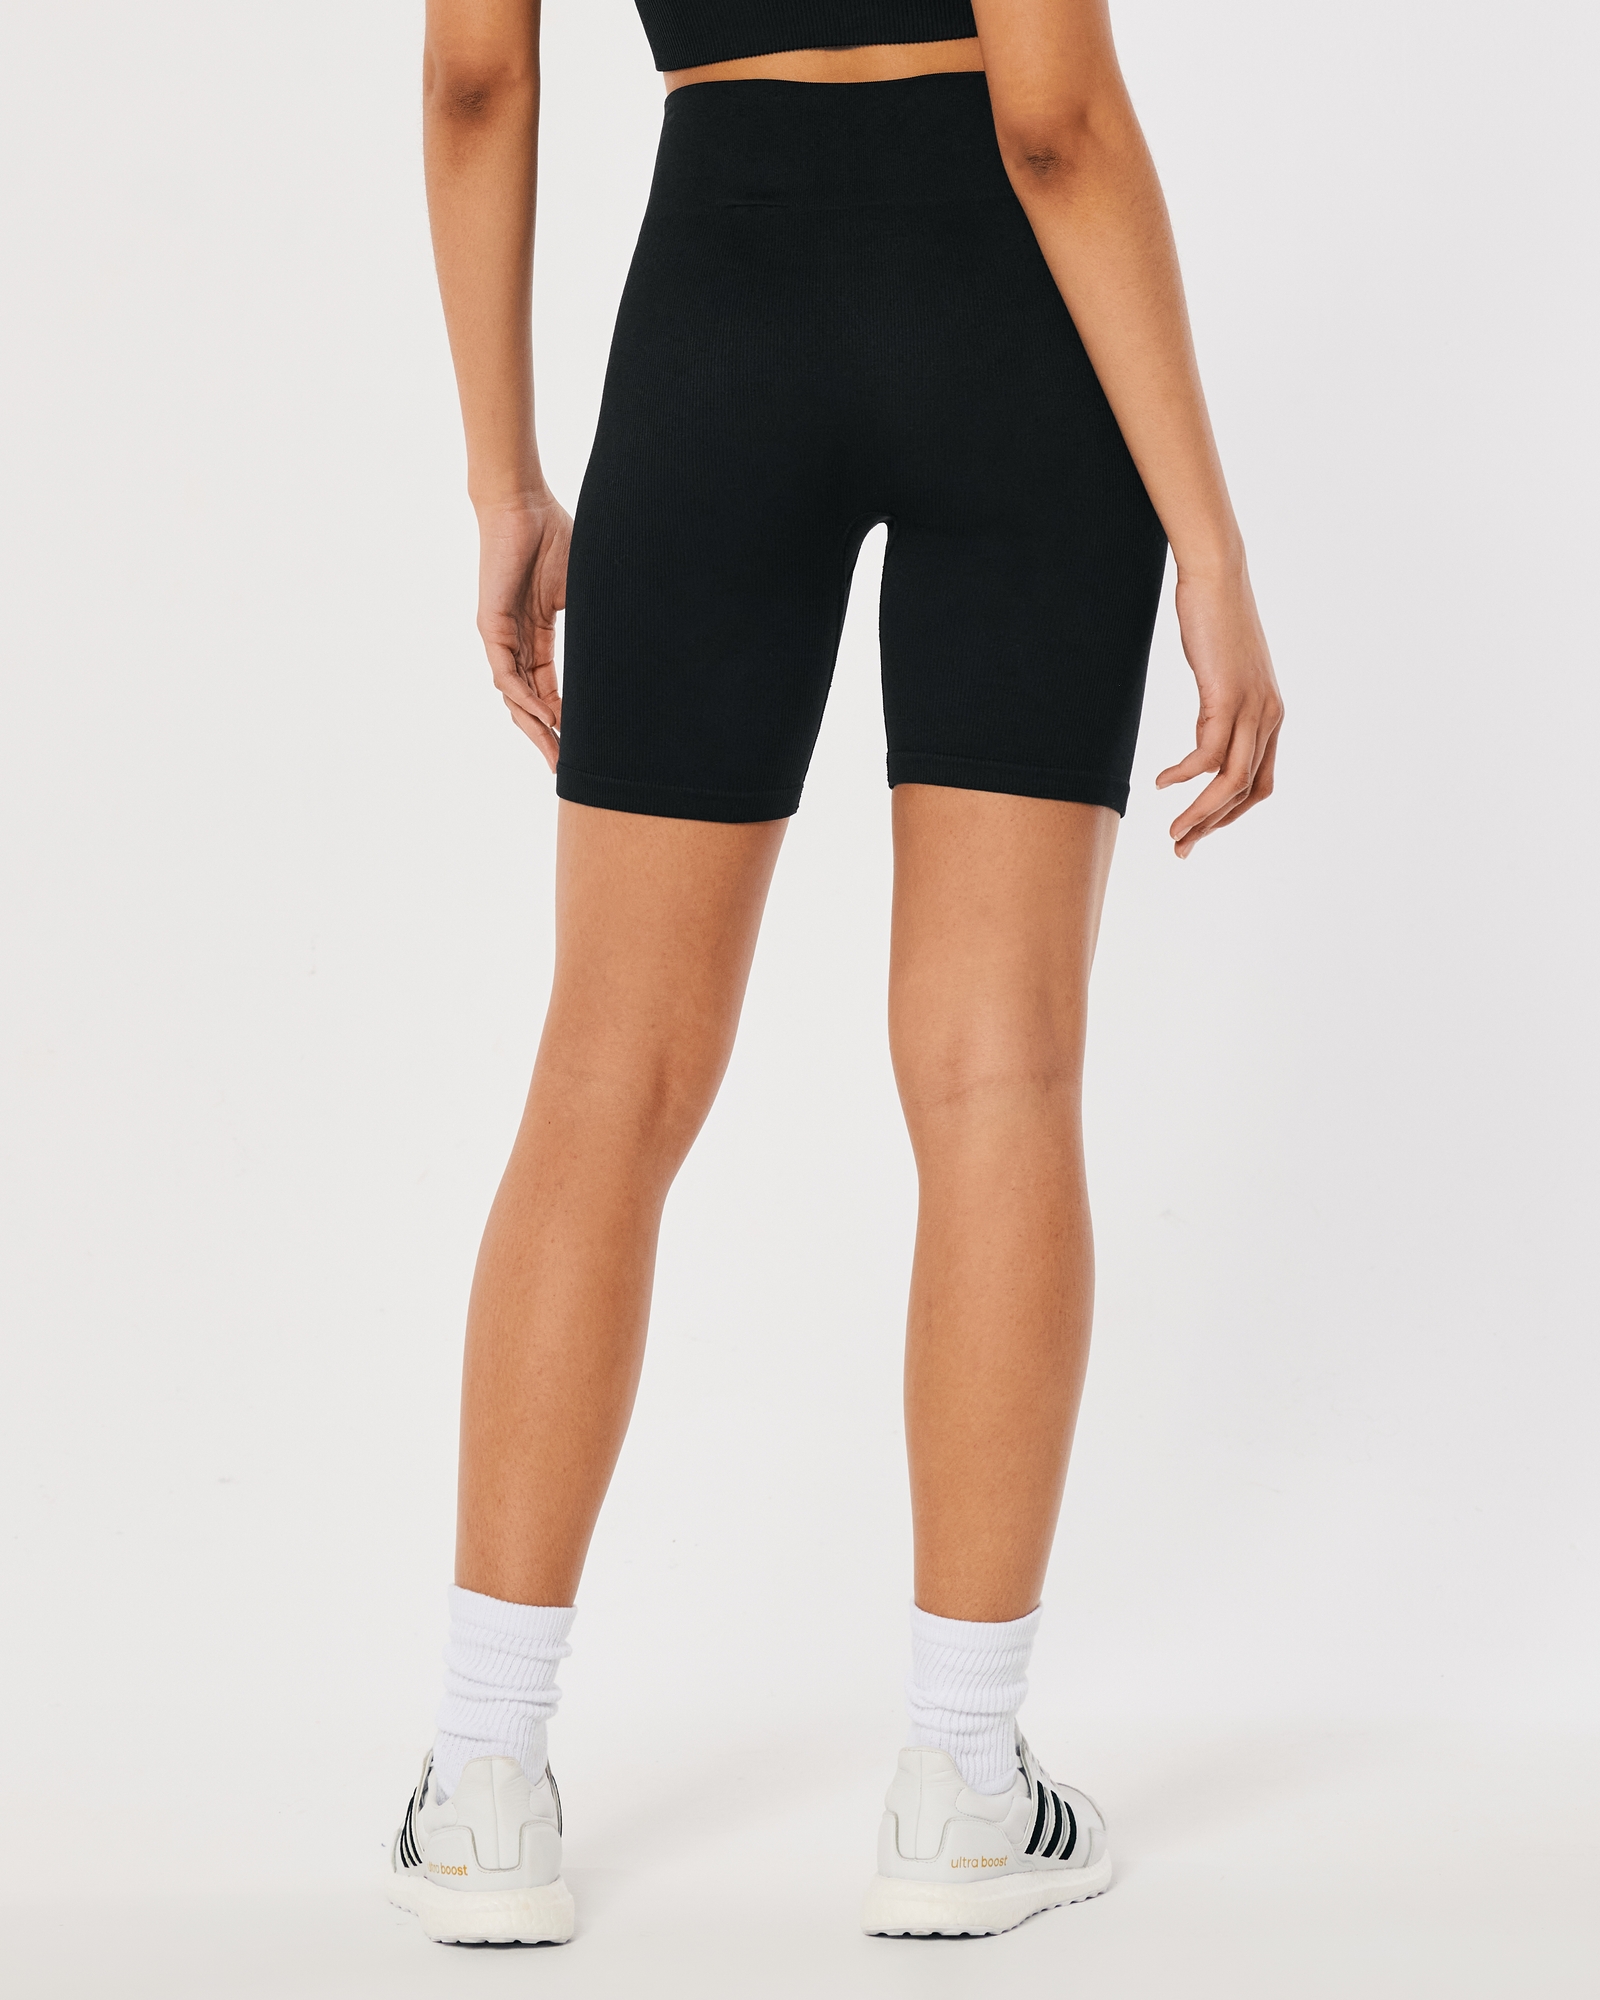 Best Bike Shorts From Target: Colsie Women's Seamless Ribbed Bike Shorts, The 15 Best Bike Shorts That'll Take You From the Gym to Brunch